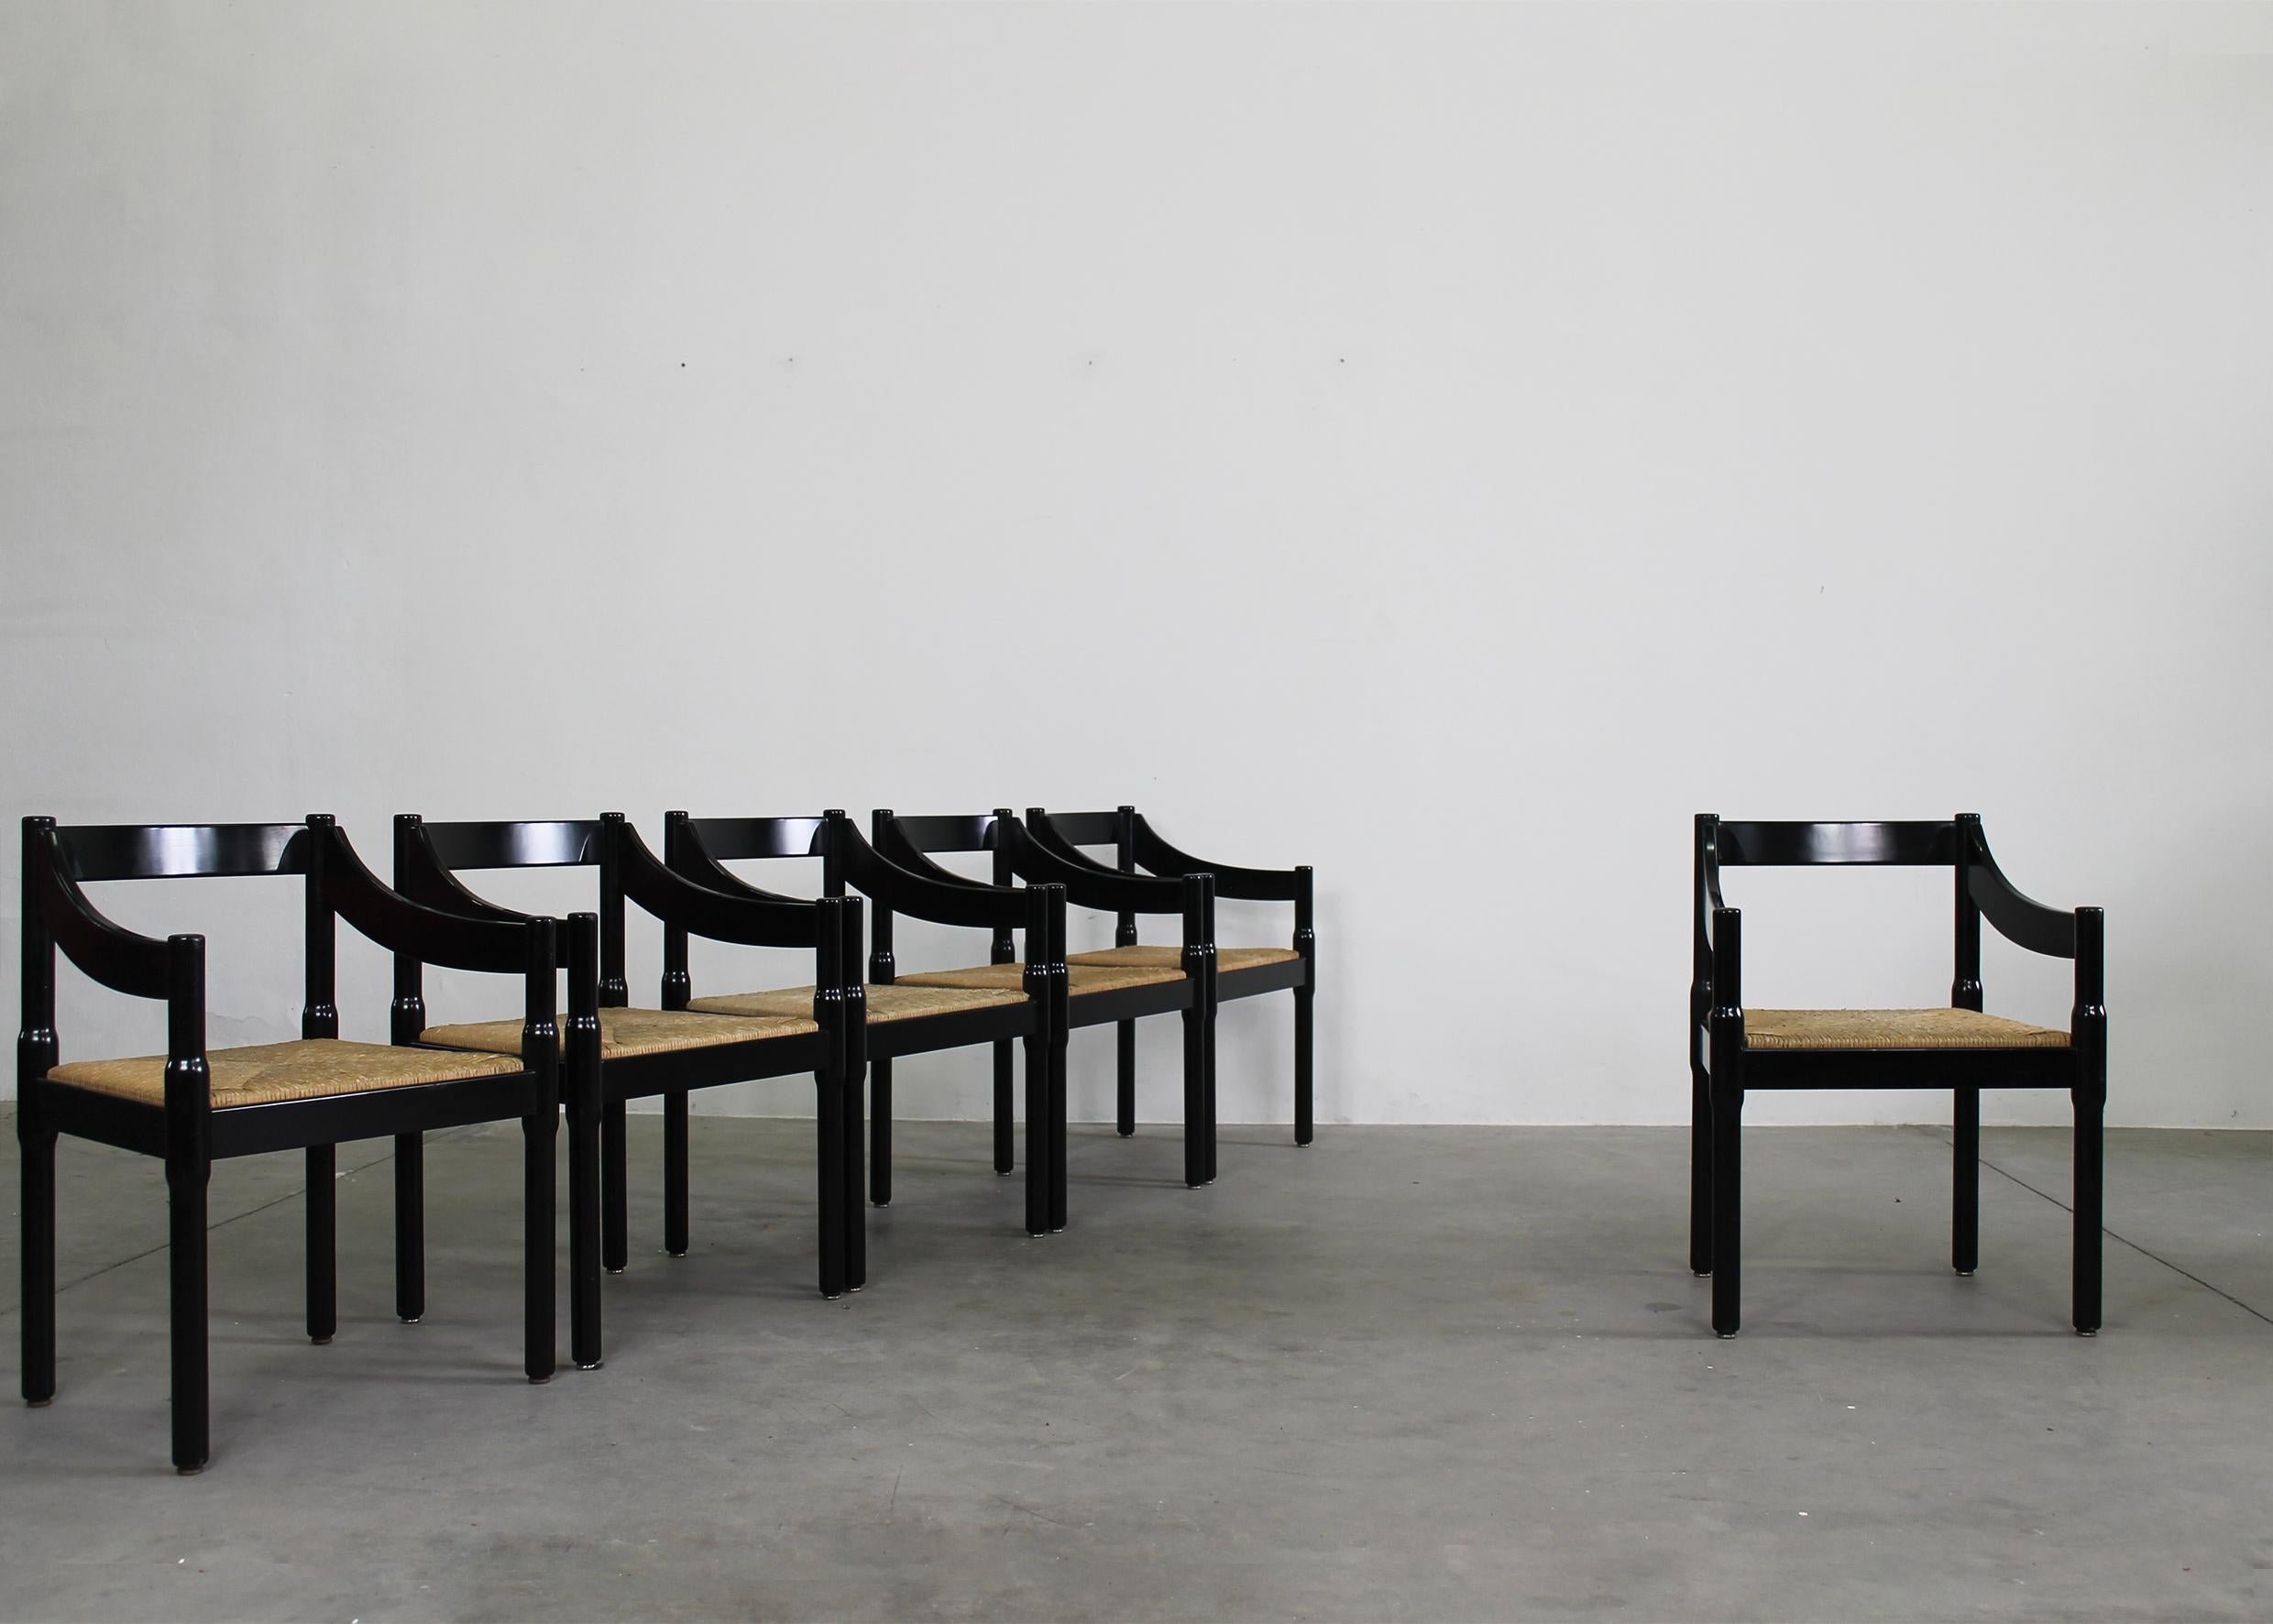 Set of six Carimate chairs with structure in black lacquered beech wood and woven straw seat, designed by Vico Magistretti and produced by Cassina in the 1960s. 

The Carimate chair was originally designed for the Carimate Club House in Como in 1959